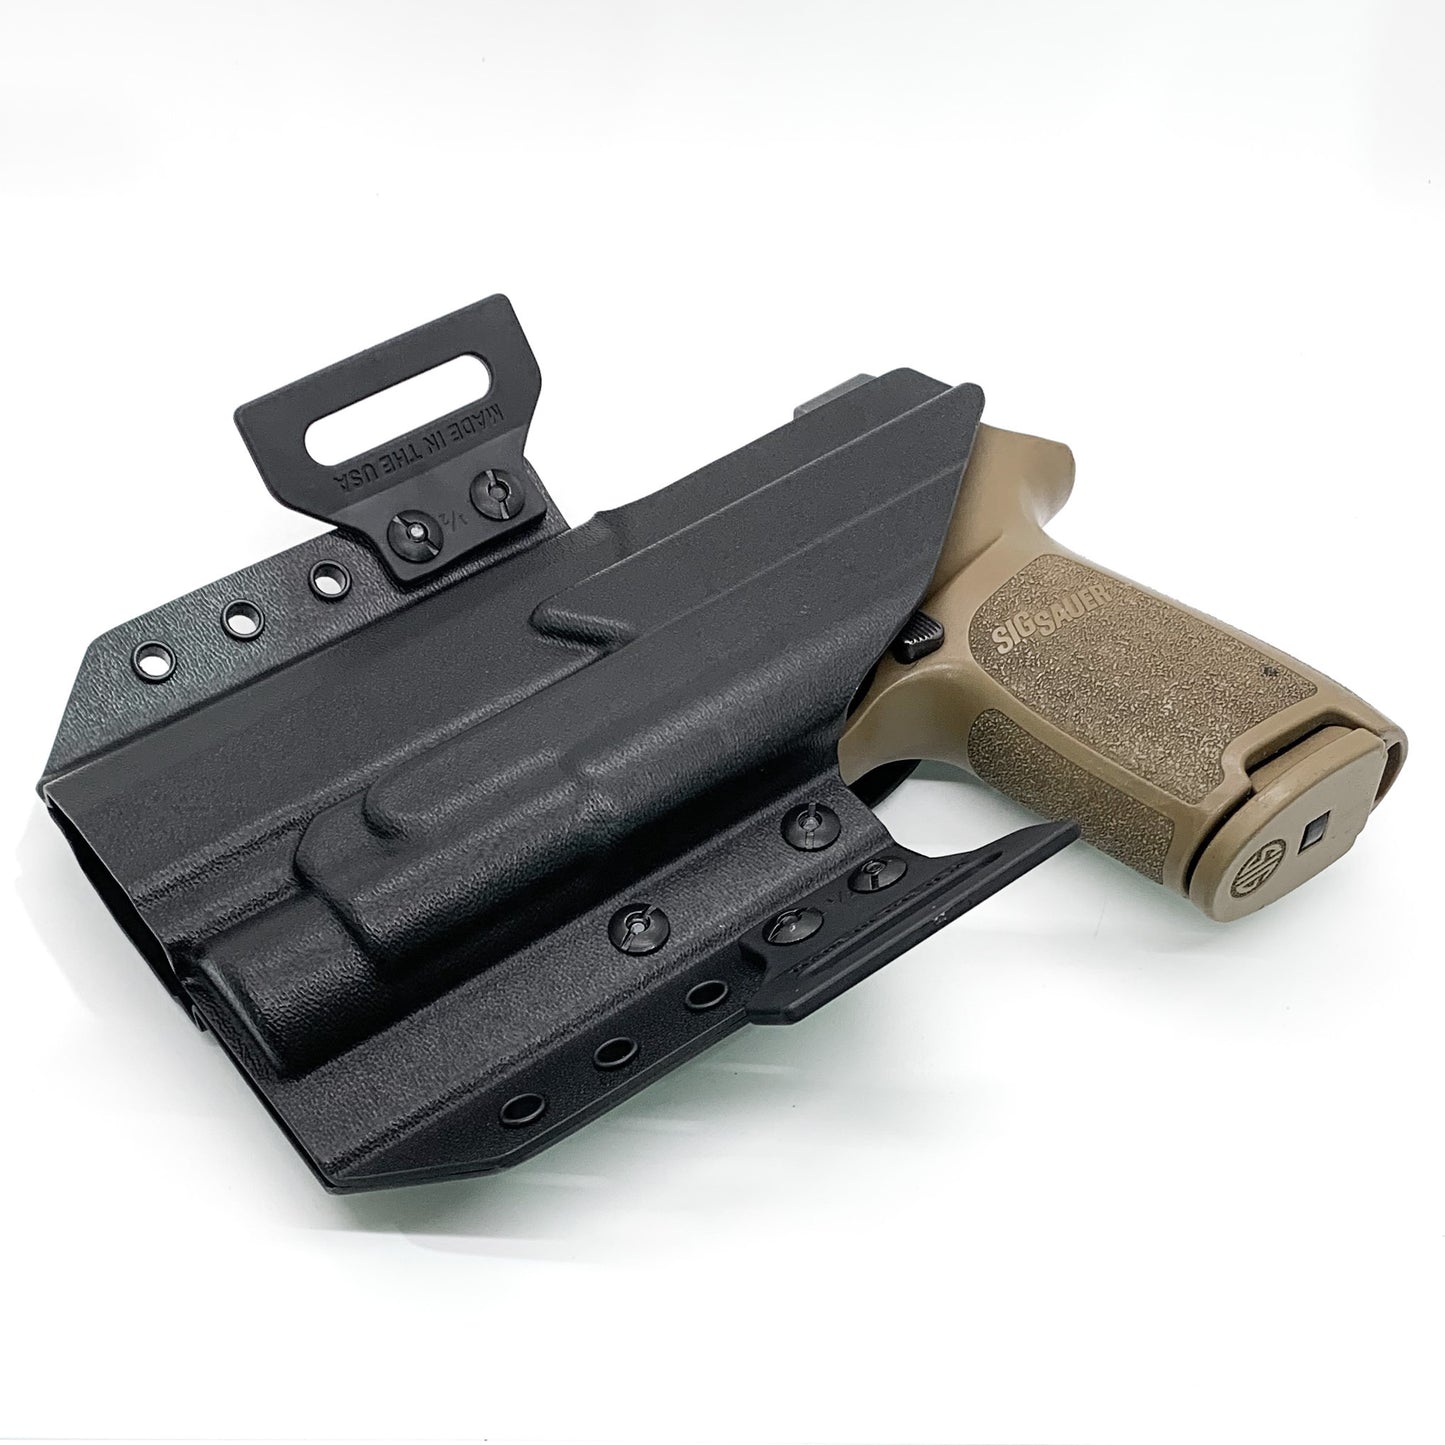 For the best OWB Outside Waistband Pancake Style holster for the Sig Sauer P320 with the Streamlight TLR-1 HL, shop Four Brothers Holsters.  Adjustable cant, cleared for red dot sights and enclosed emitter optics. Short, fast shipping with 24-hour lead times.